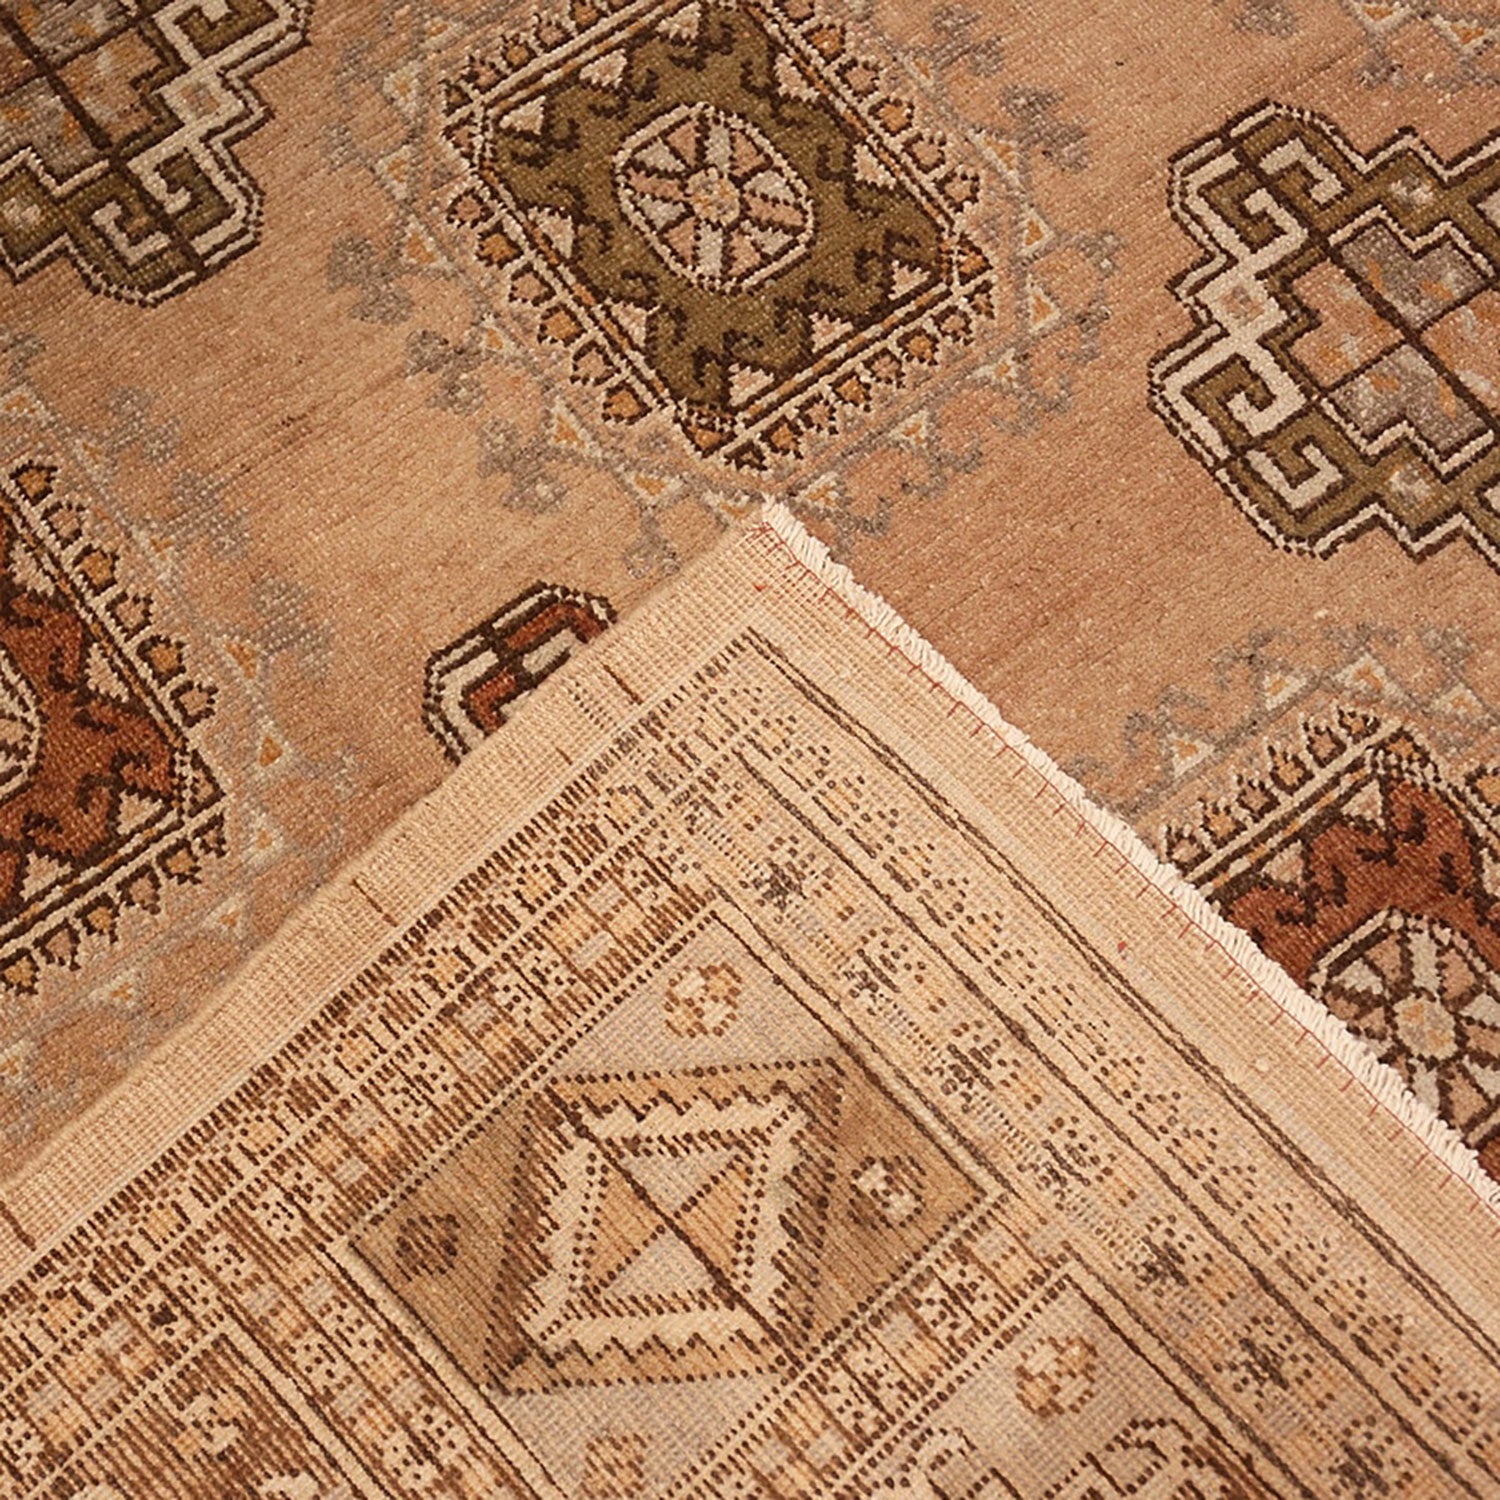 Intricate oriental rug with geometric motifs and warm earth tones.